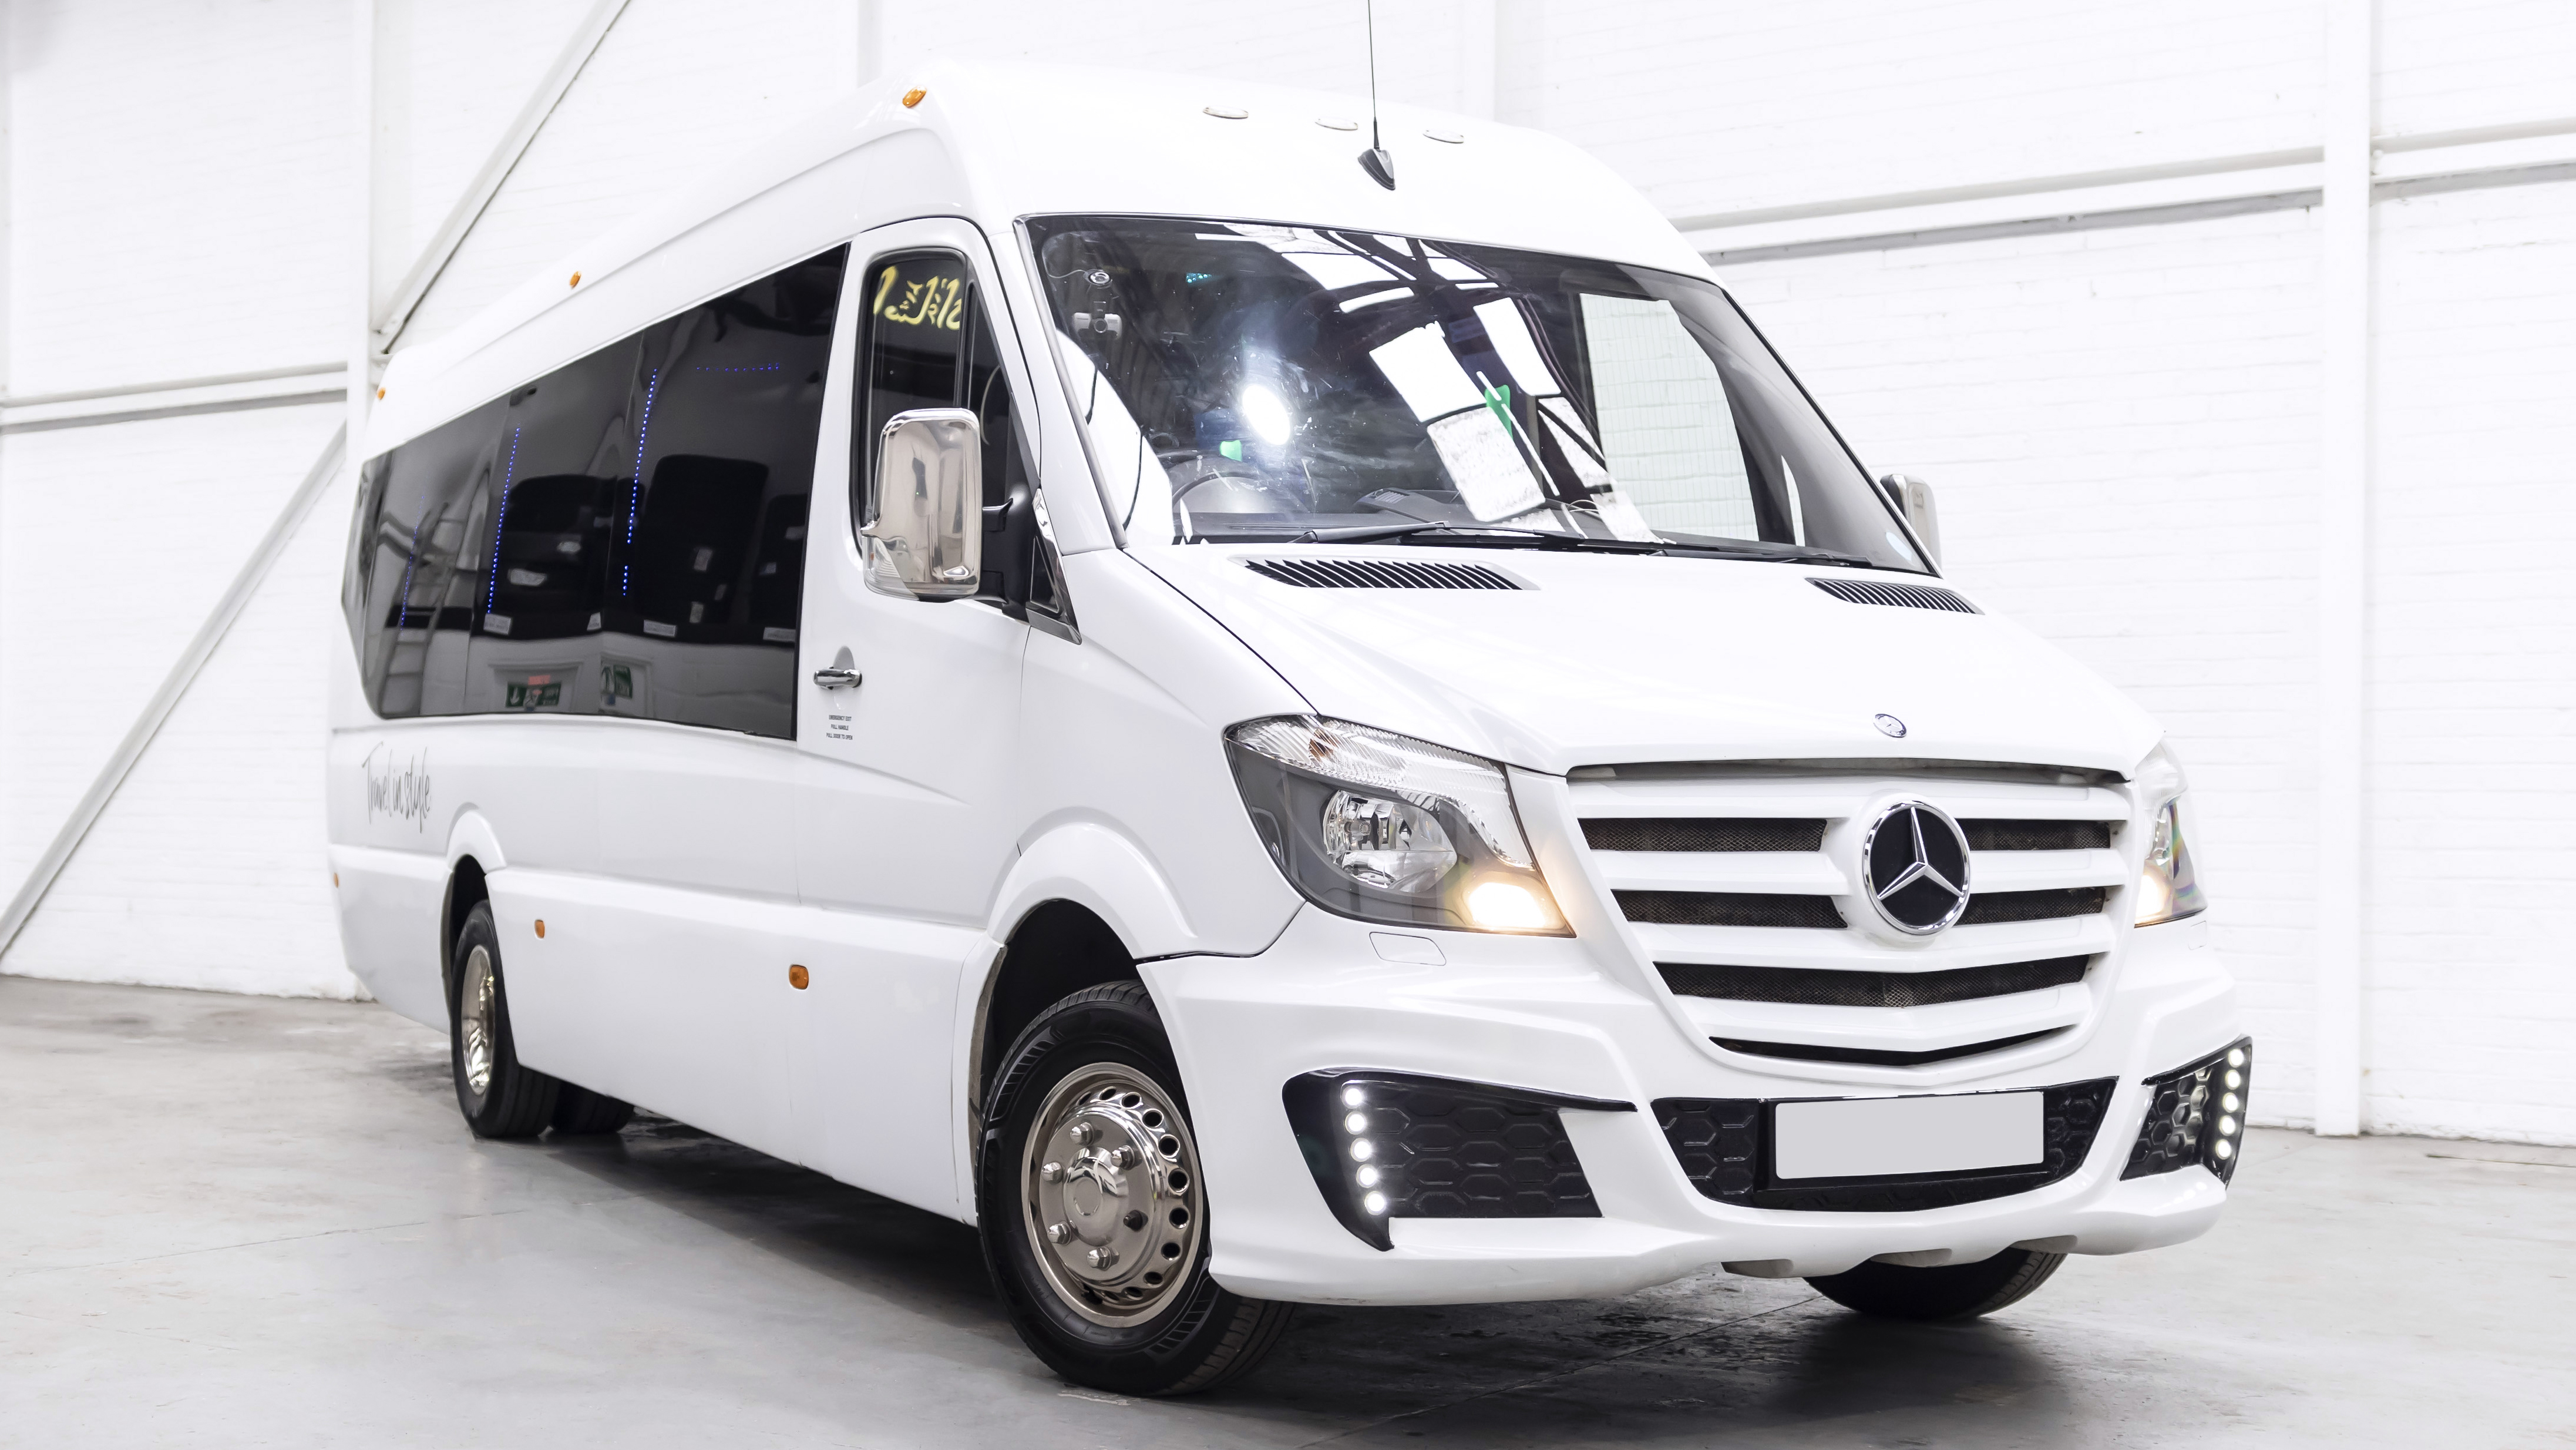 Mercedes Party Bus wedding car for hire in Bradford, West Yorkshire